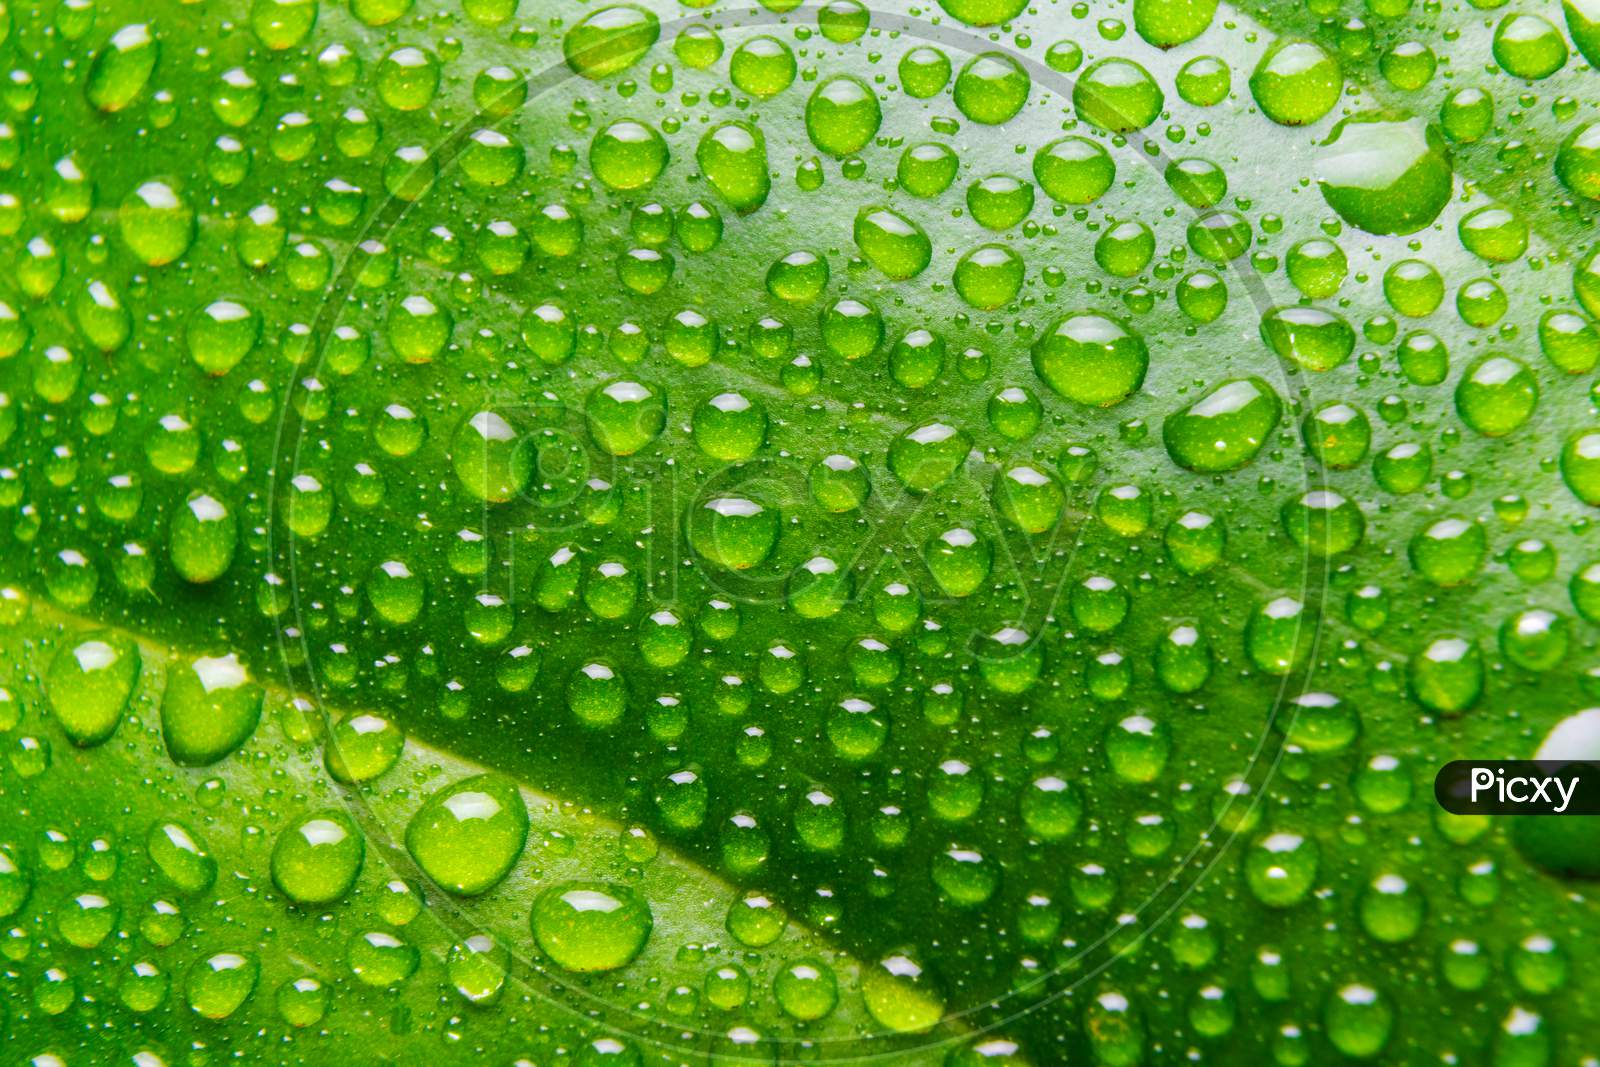 Background Of Rain Water Droplets On The Green Leaf.